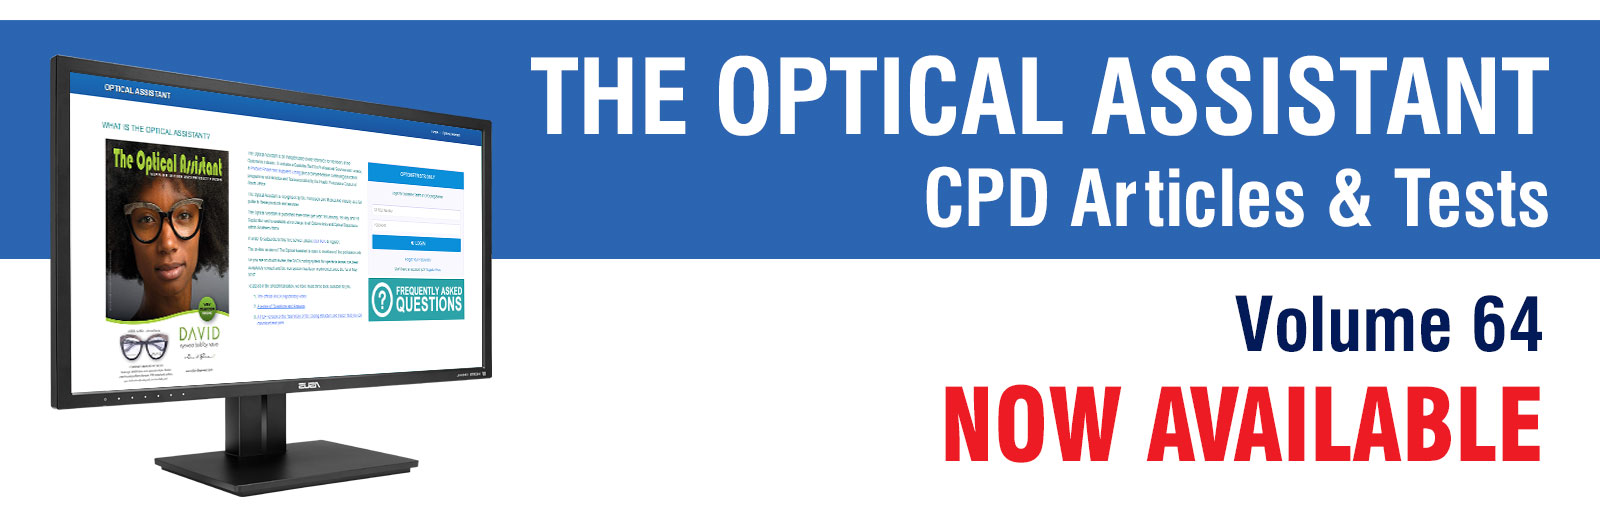 The Optical Assistant, Volume 64, Now Available